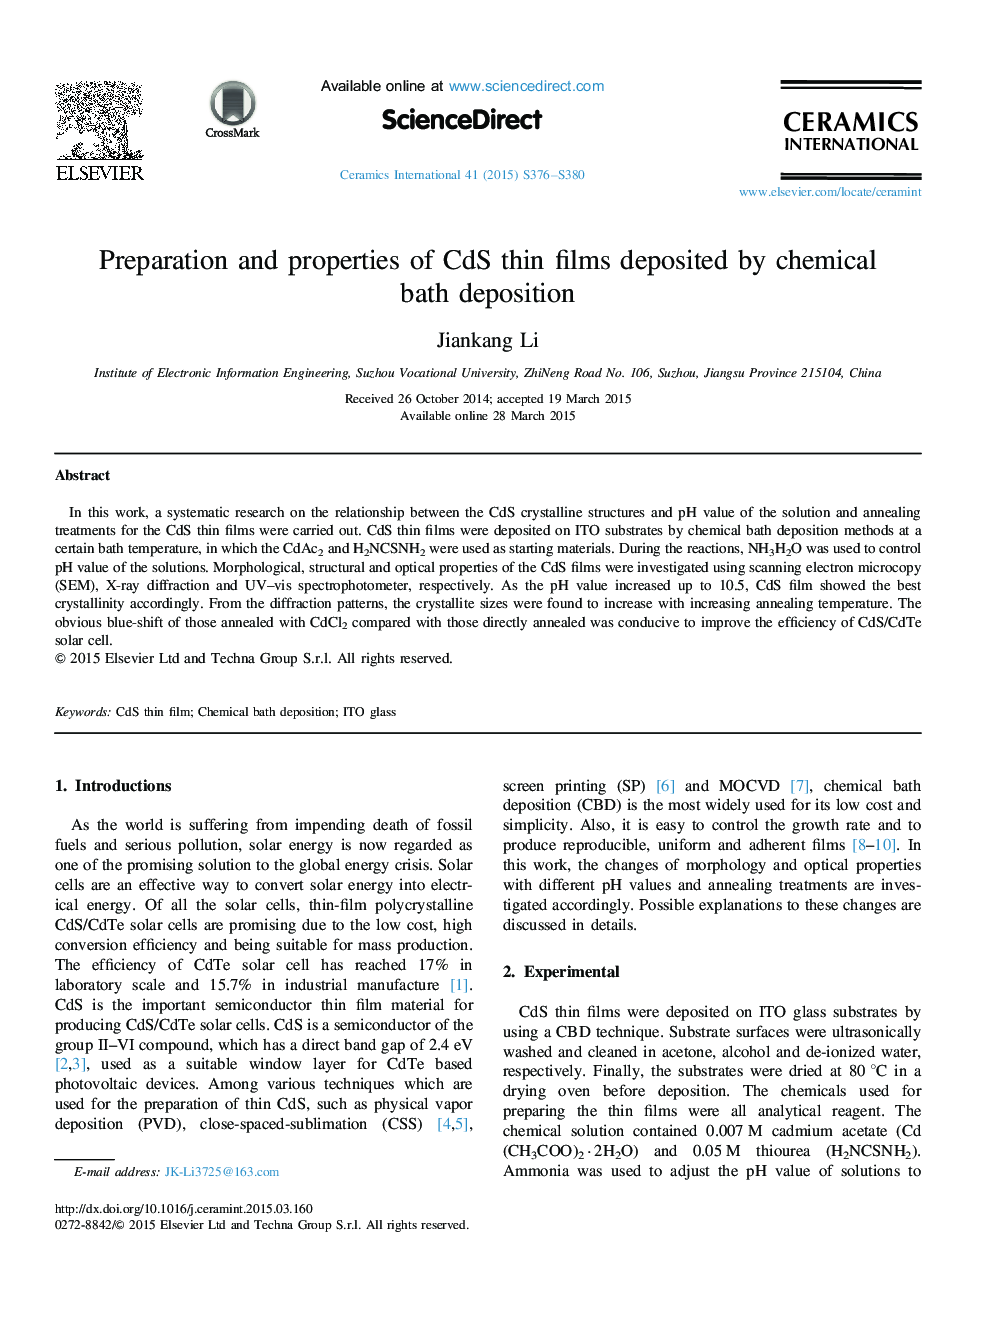 Preparation and properties of CdS thin films deposited by chemical bath deposition